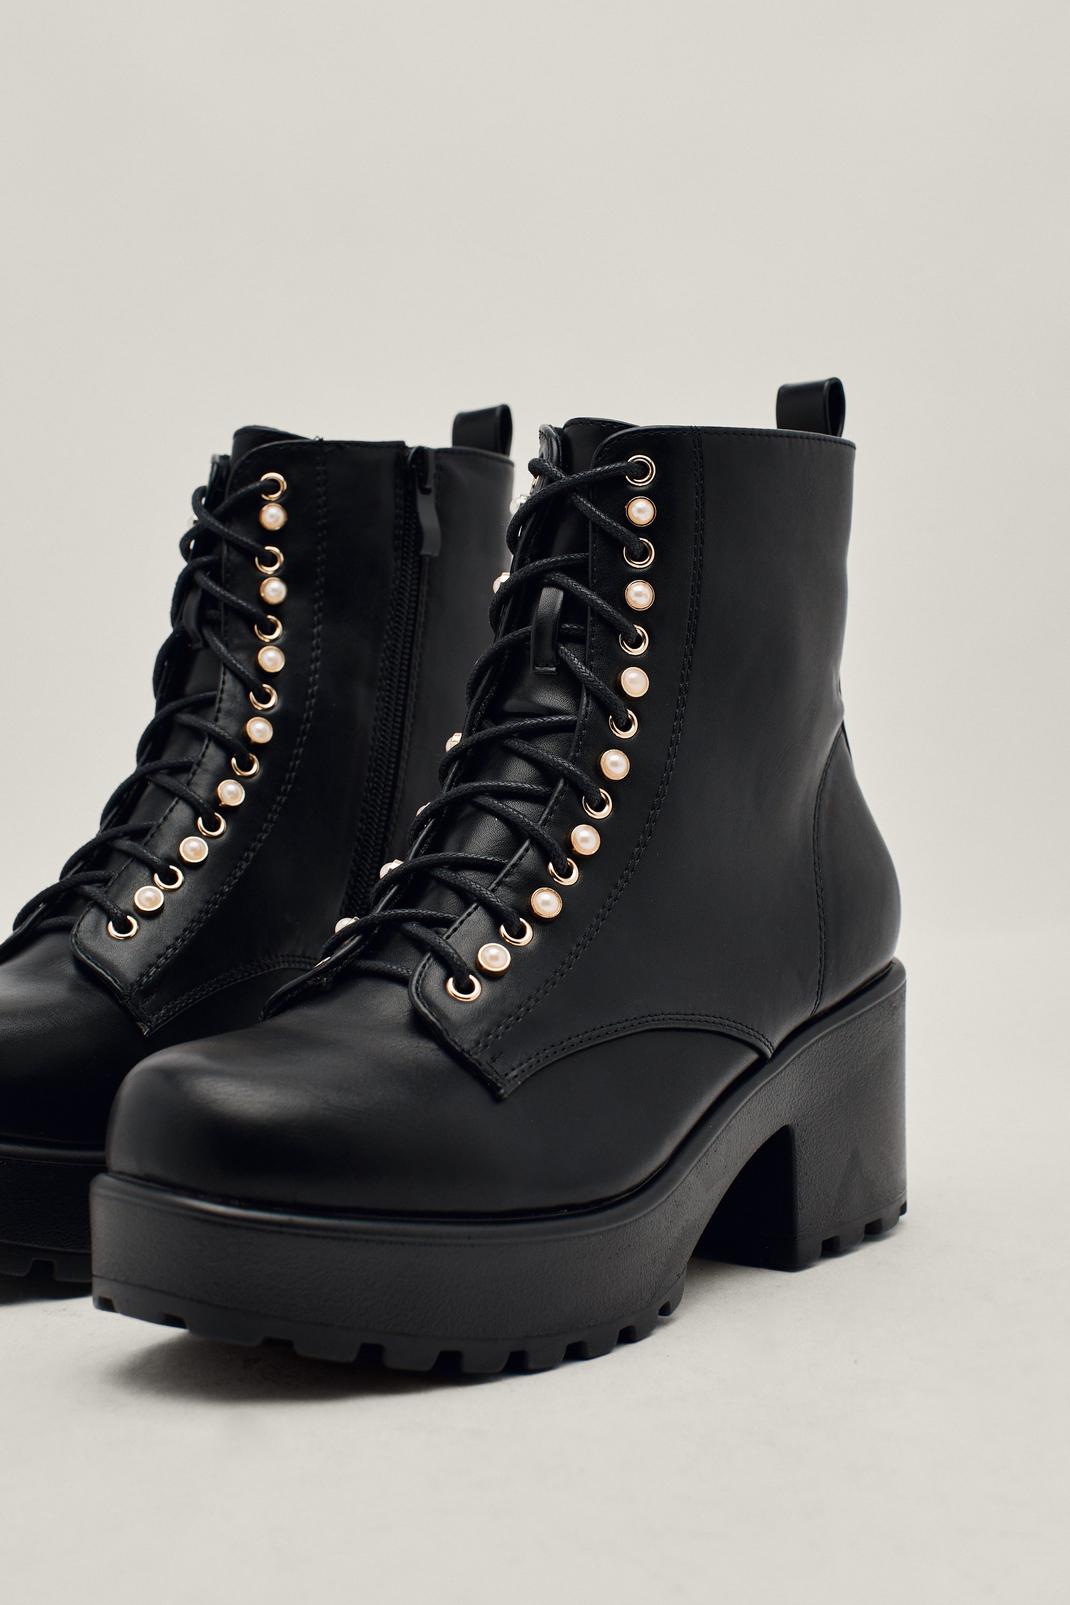 Black Heeled Lace Up Boots Leather | sincovaga.com.br